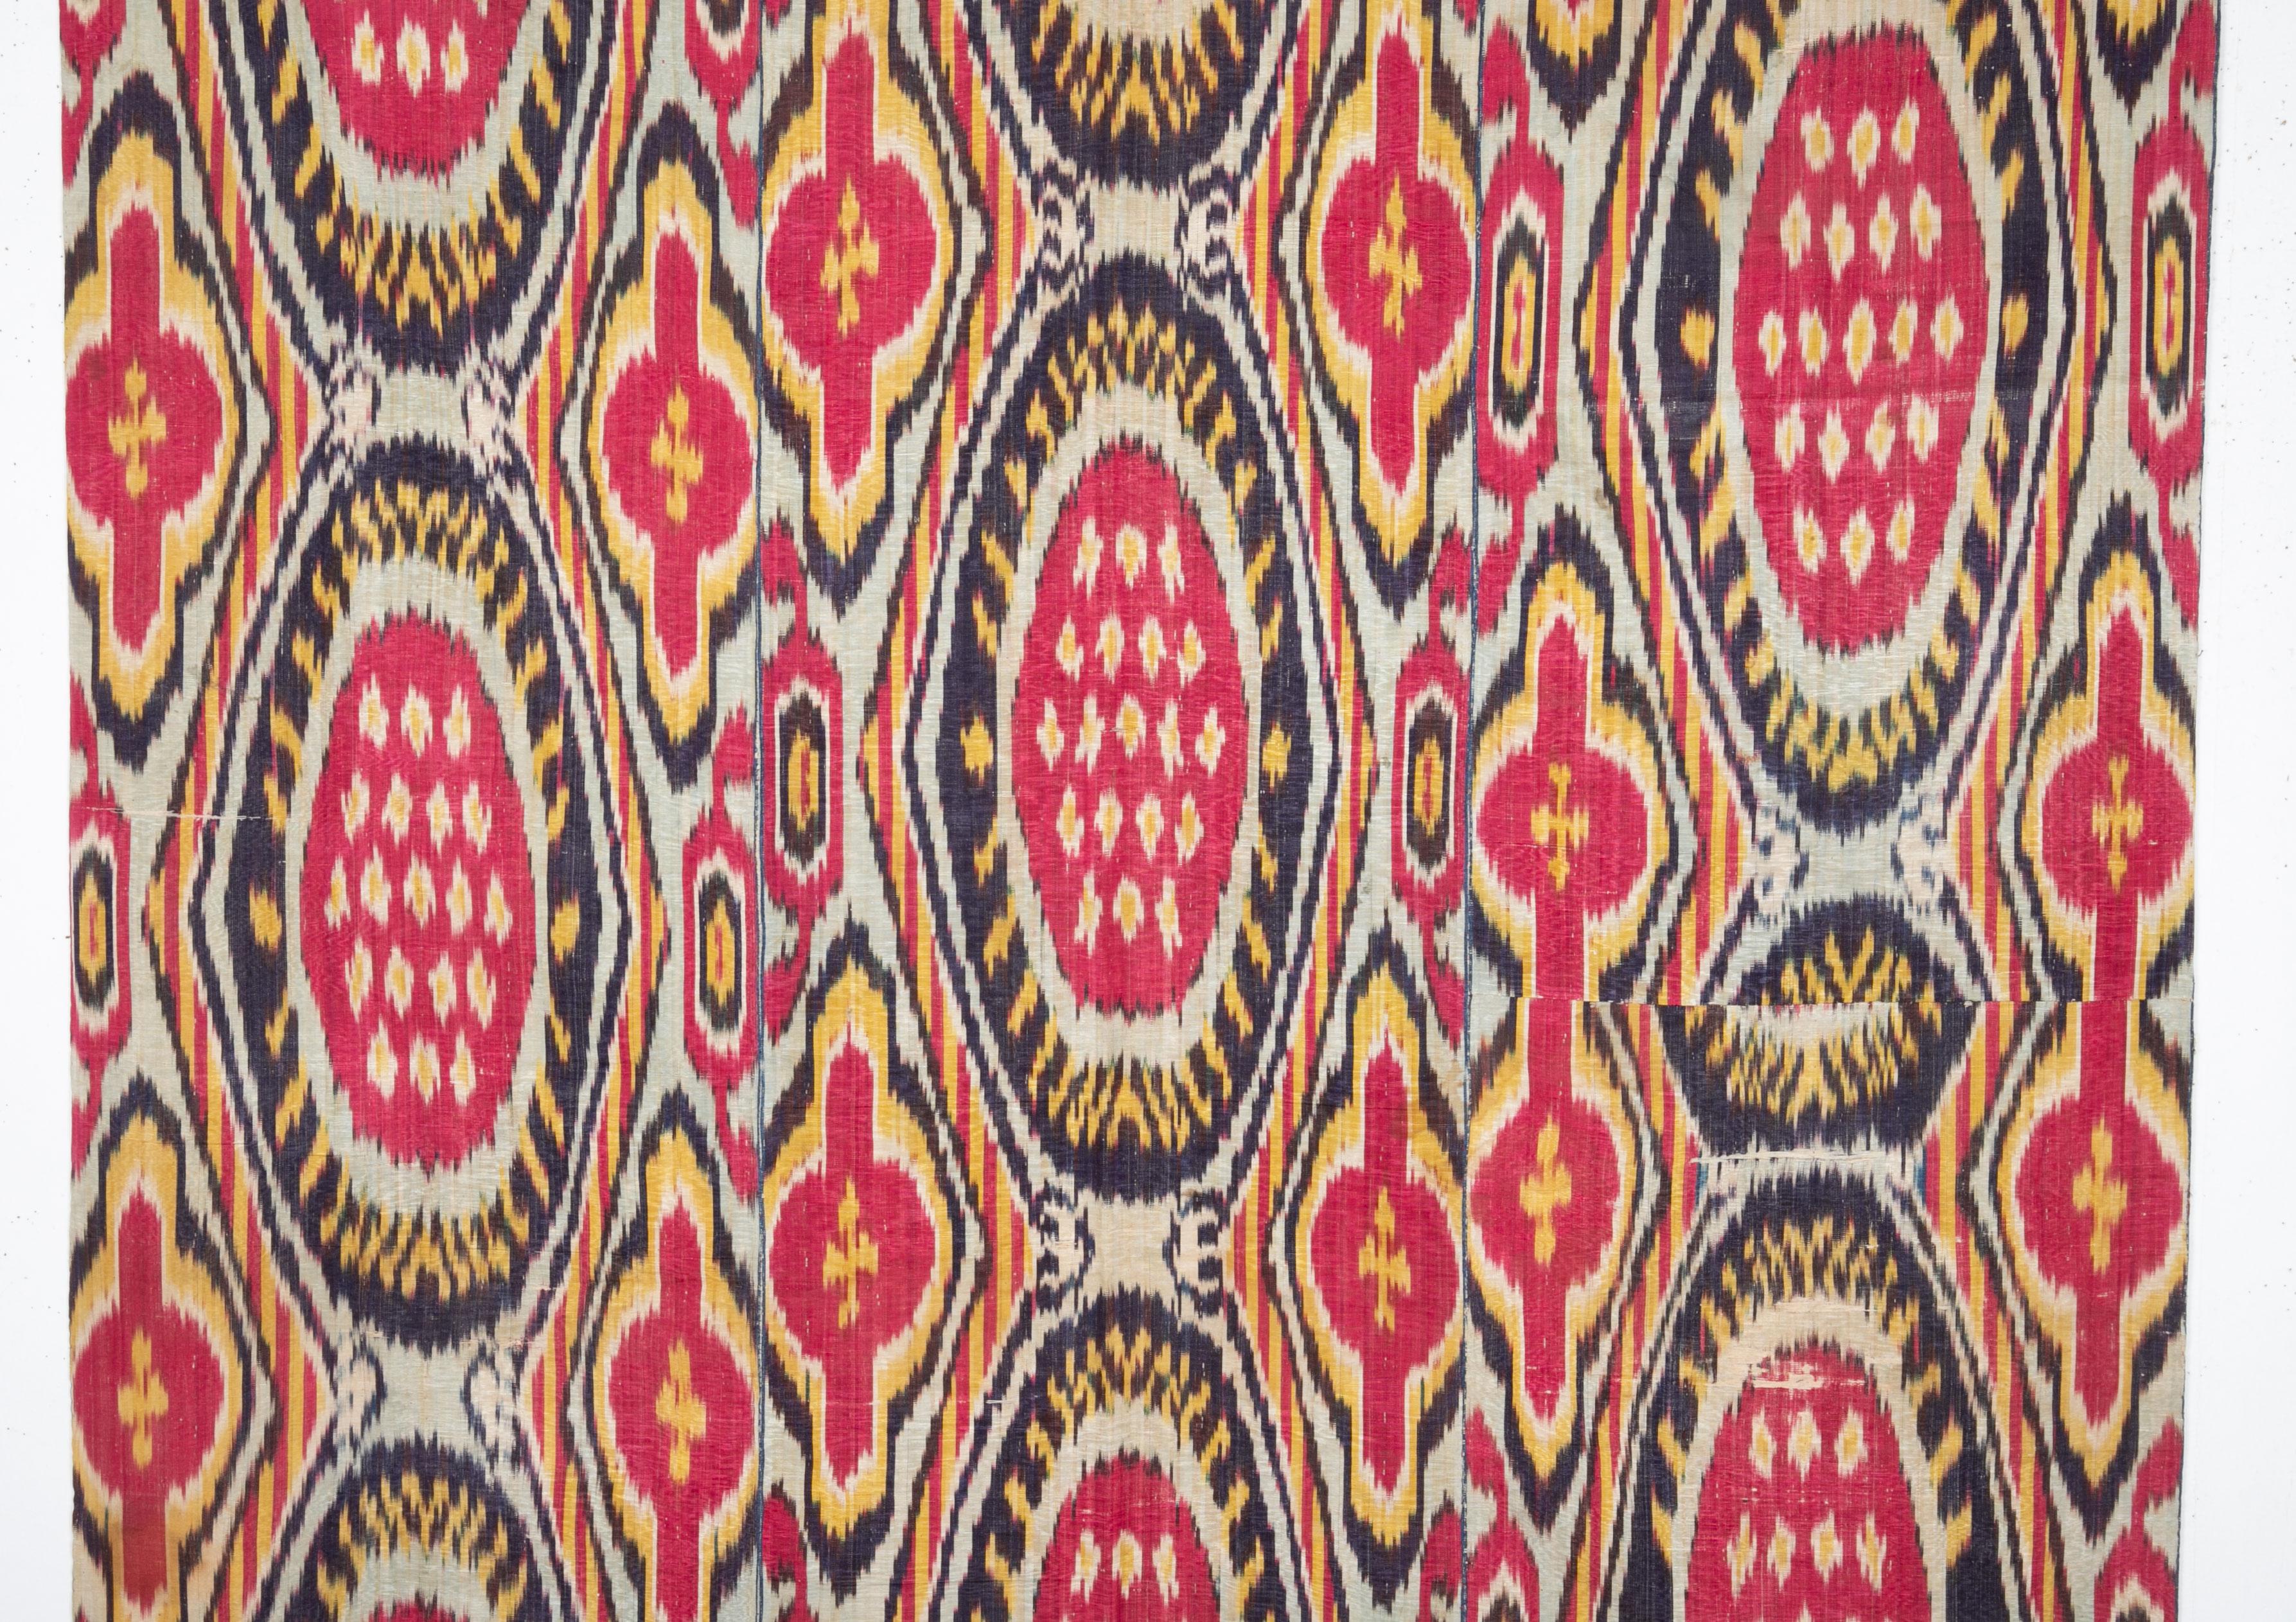 It is silk warp cotton weft , madras irate panel. Their quarter 19th century Lined with a Russian roller printed cotton.